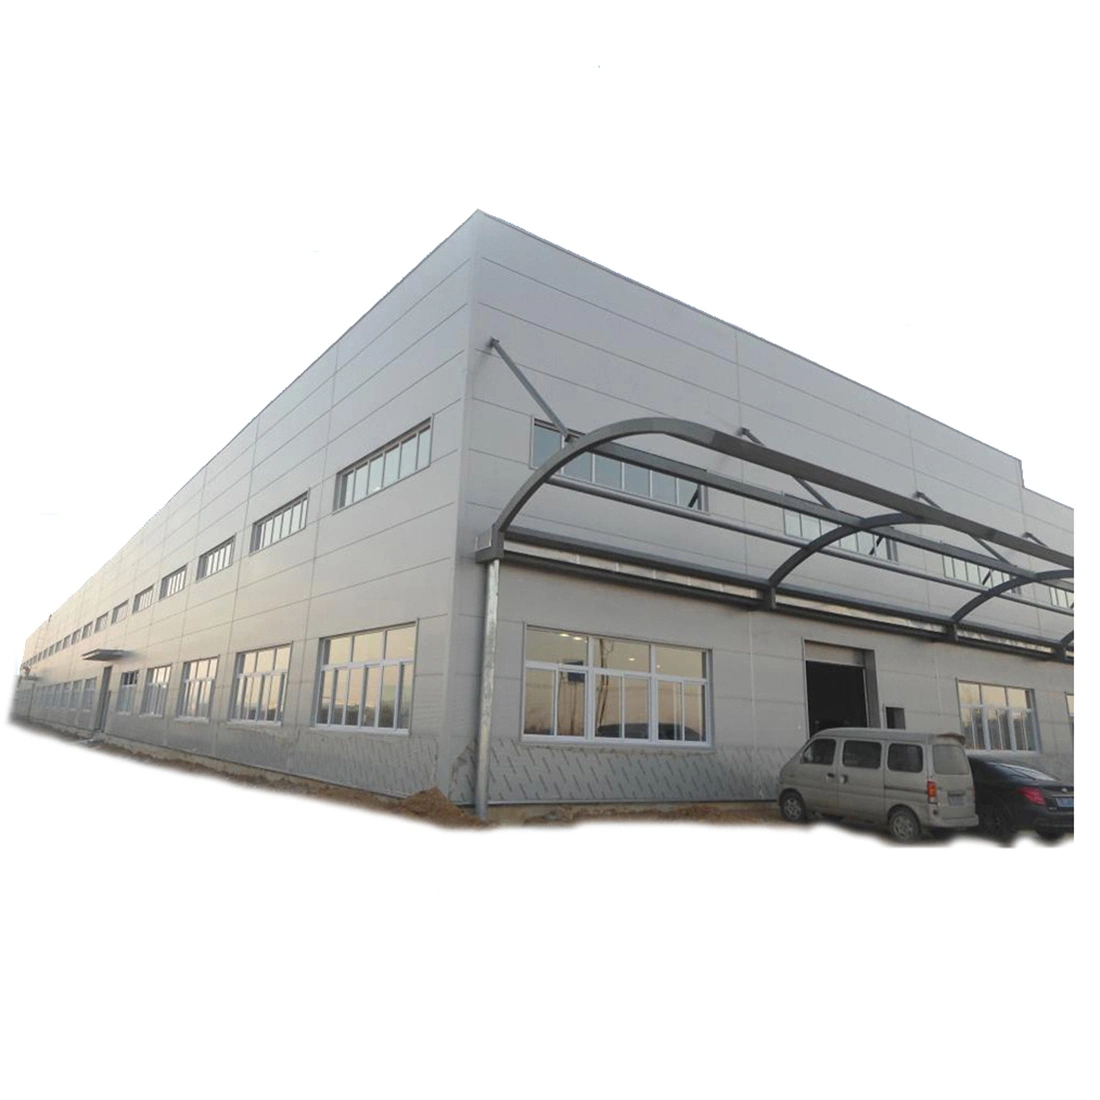 Galvanized and Painted Prefab Steel Construction Building with Insulated Materials for Roof and Wall